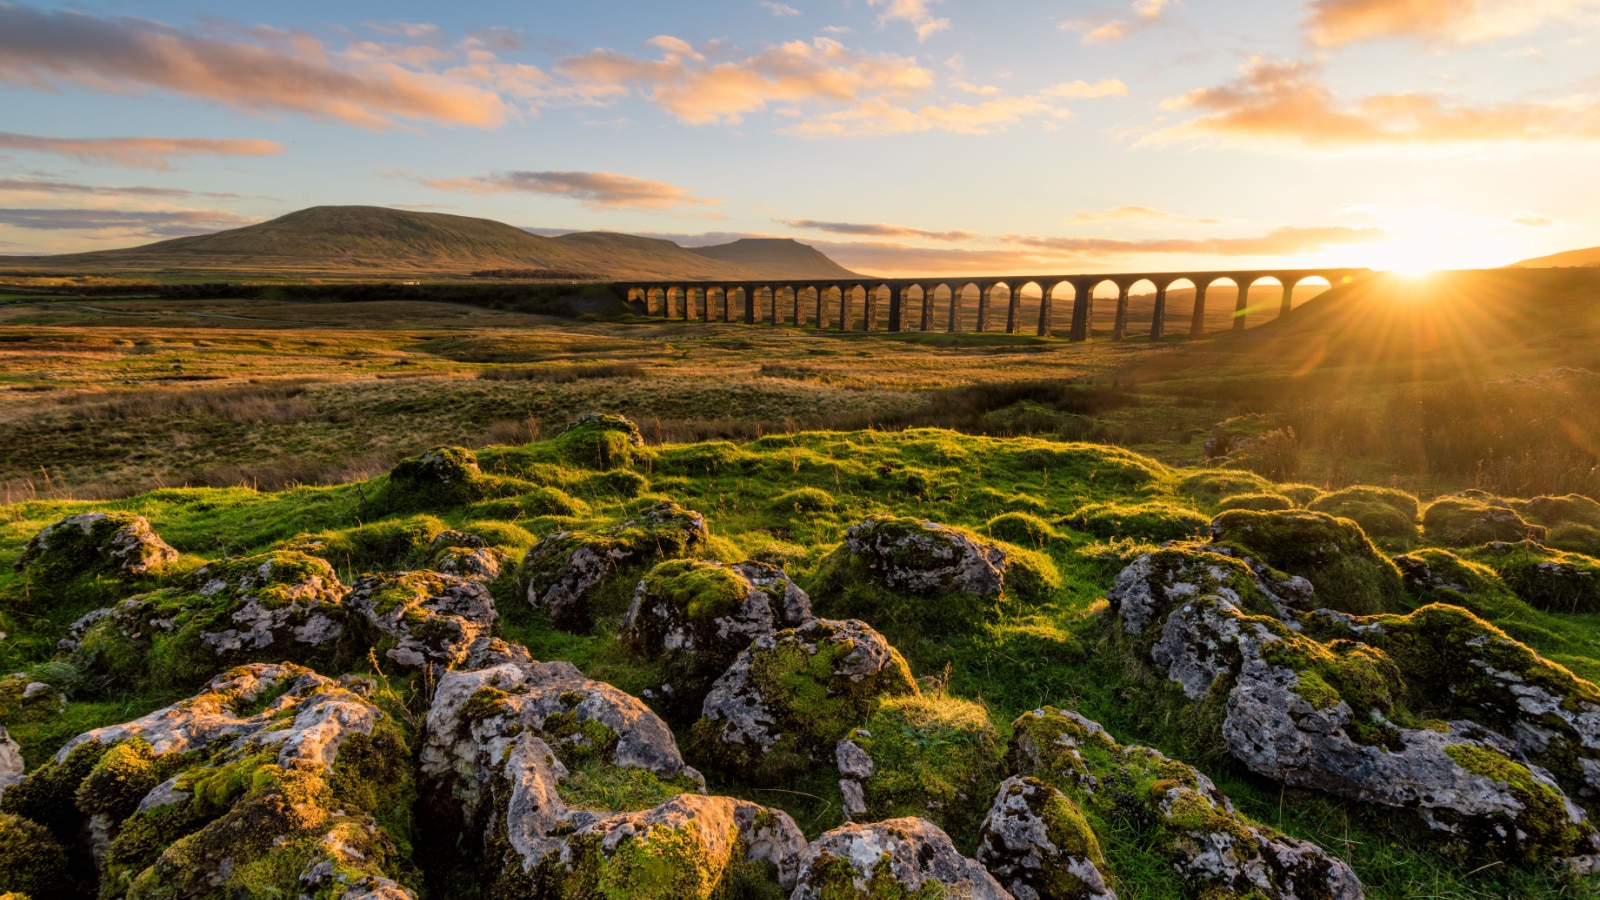 Gorgeous golden light as the sun sets behind the Ribblehead Viaduct with rocks in foreground. Yorkshire Dales